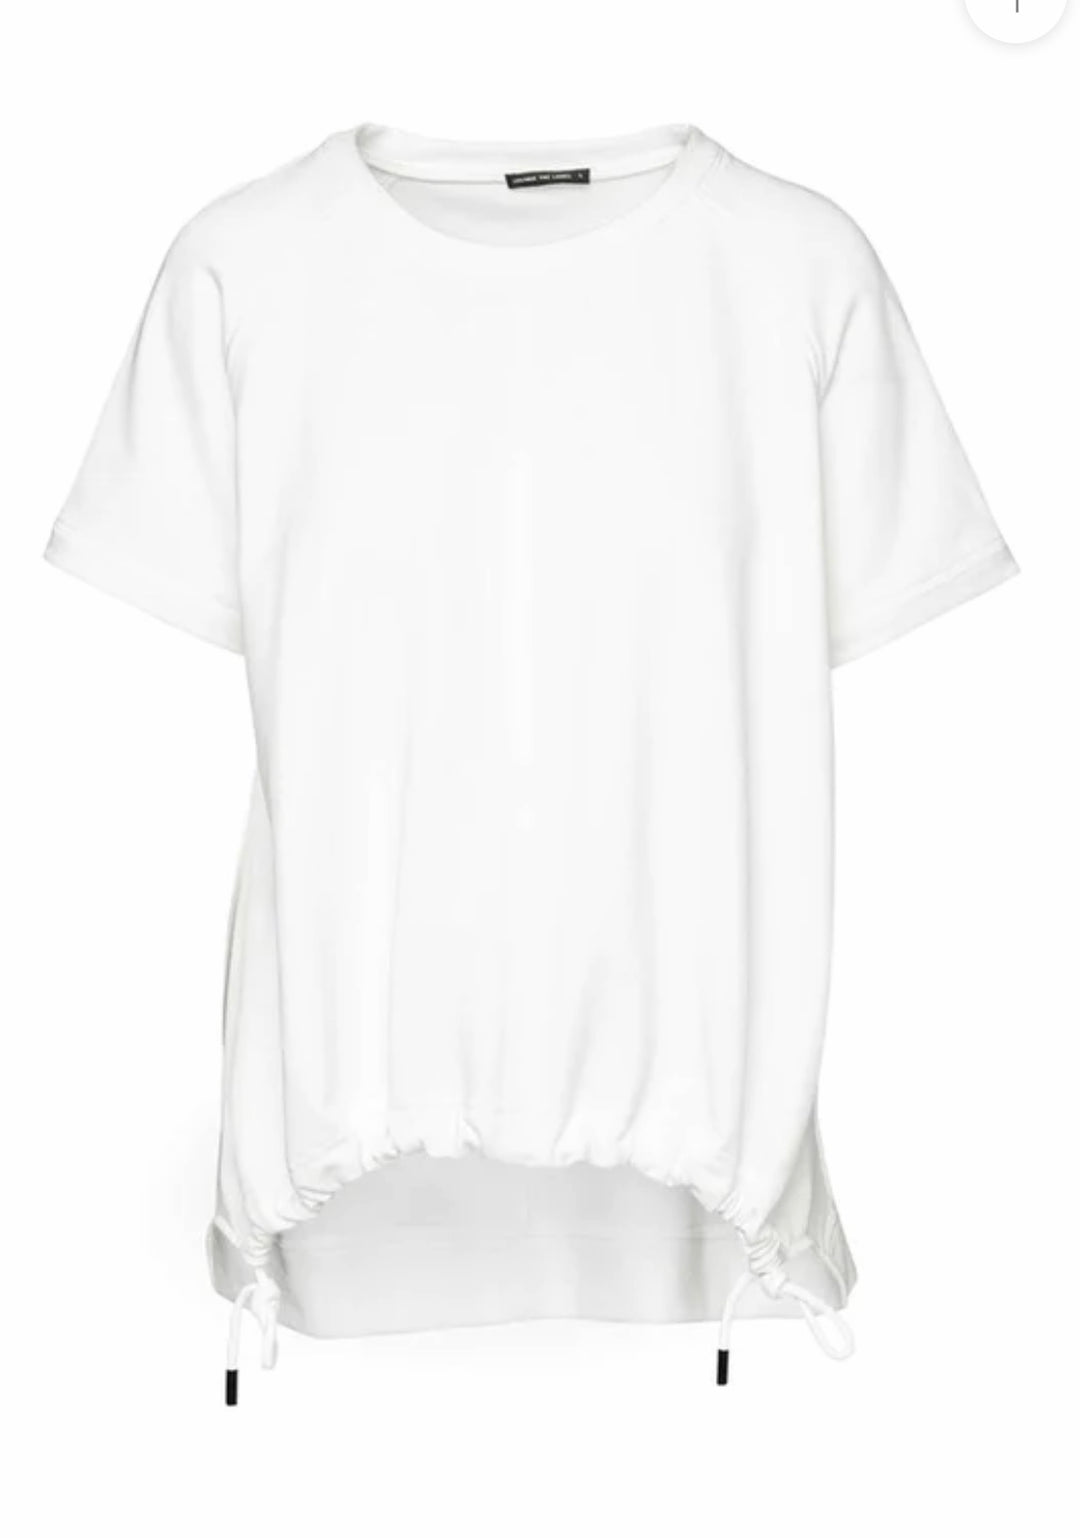 Lounge The Label - White Drawstring Top Terrie.